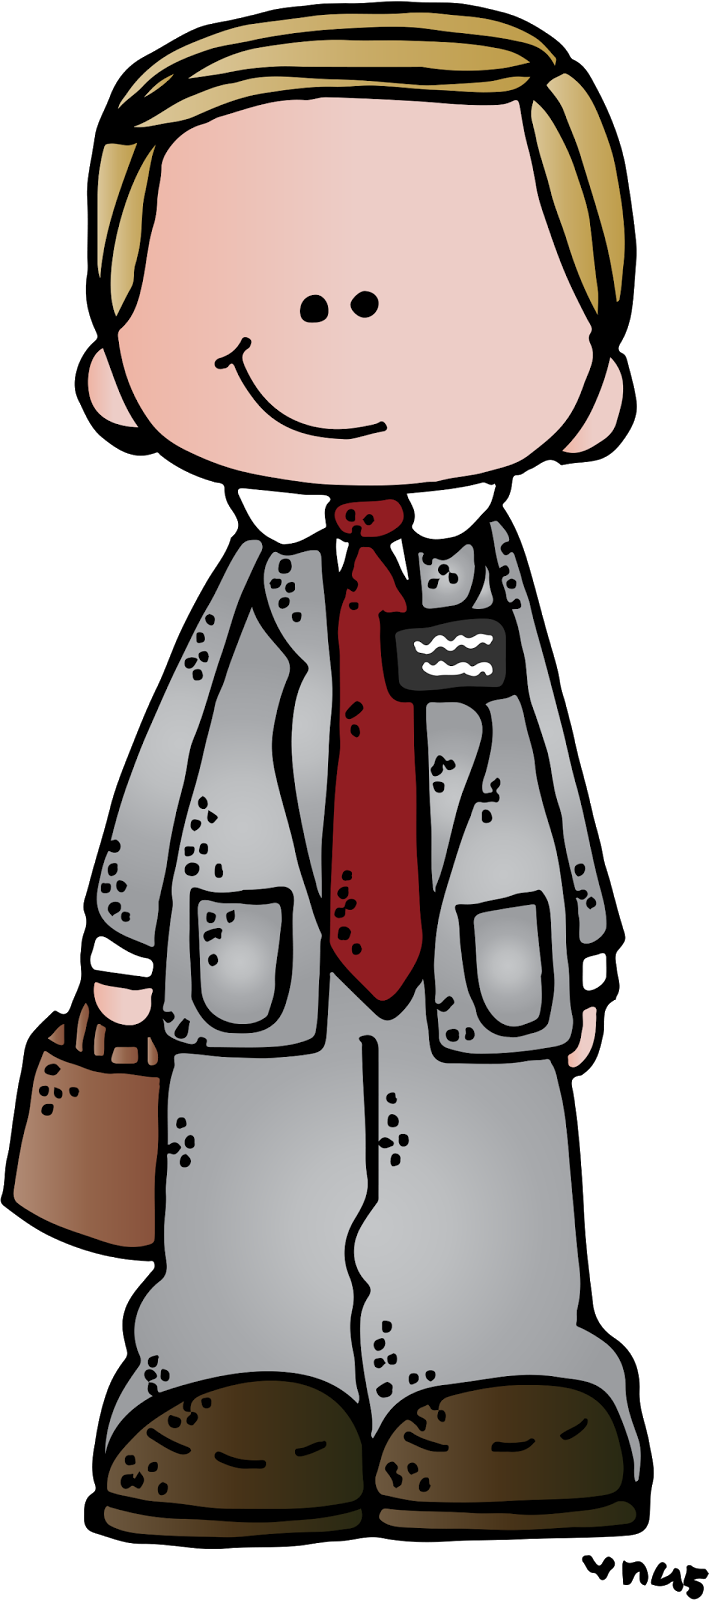 Lds Missionary Cartoon PNG - 151363